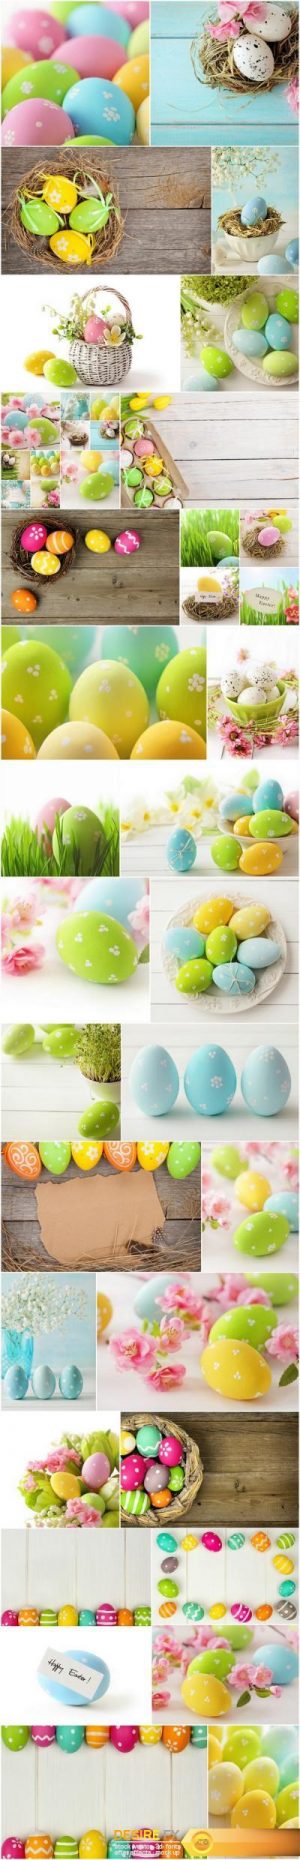 Easter Eggs and Happy Easter 4 – Set of 30xUHQ JPEG Professional Stock Images